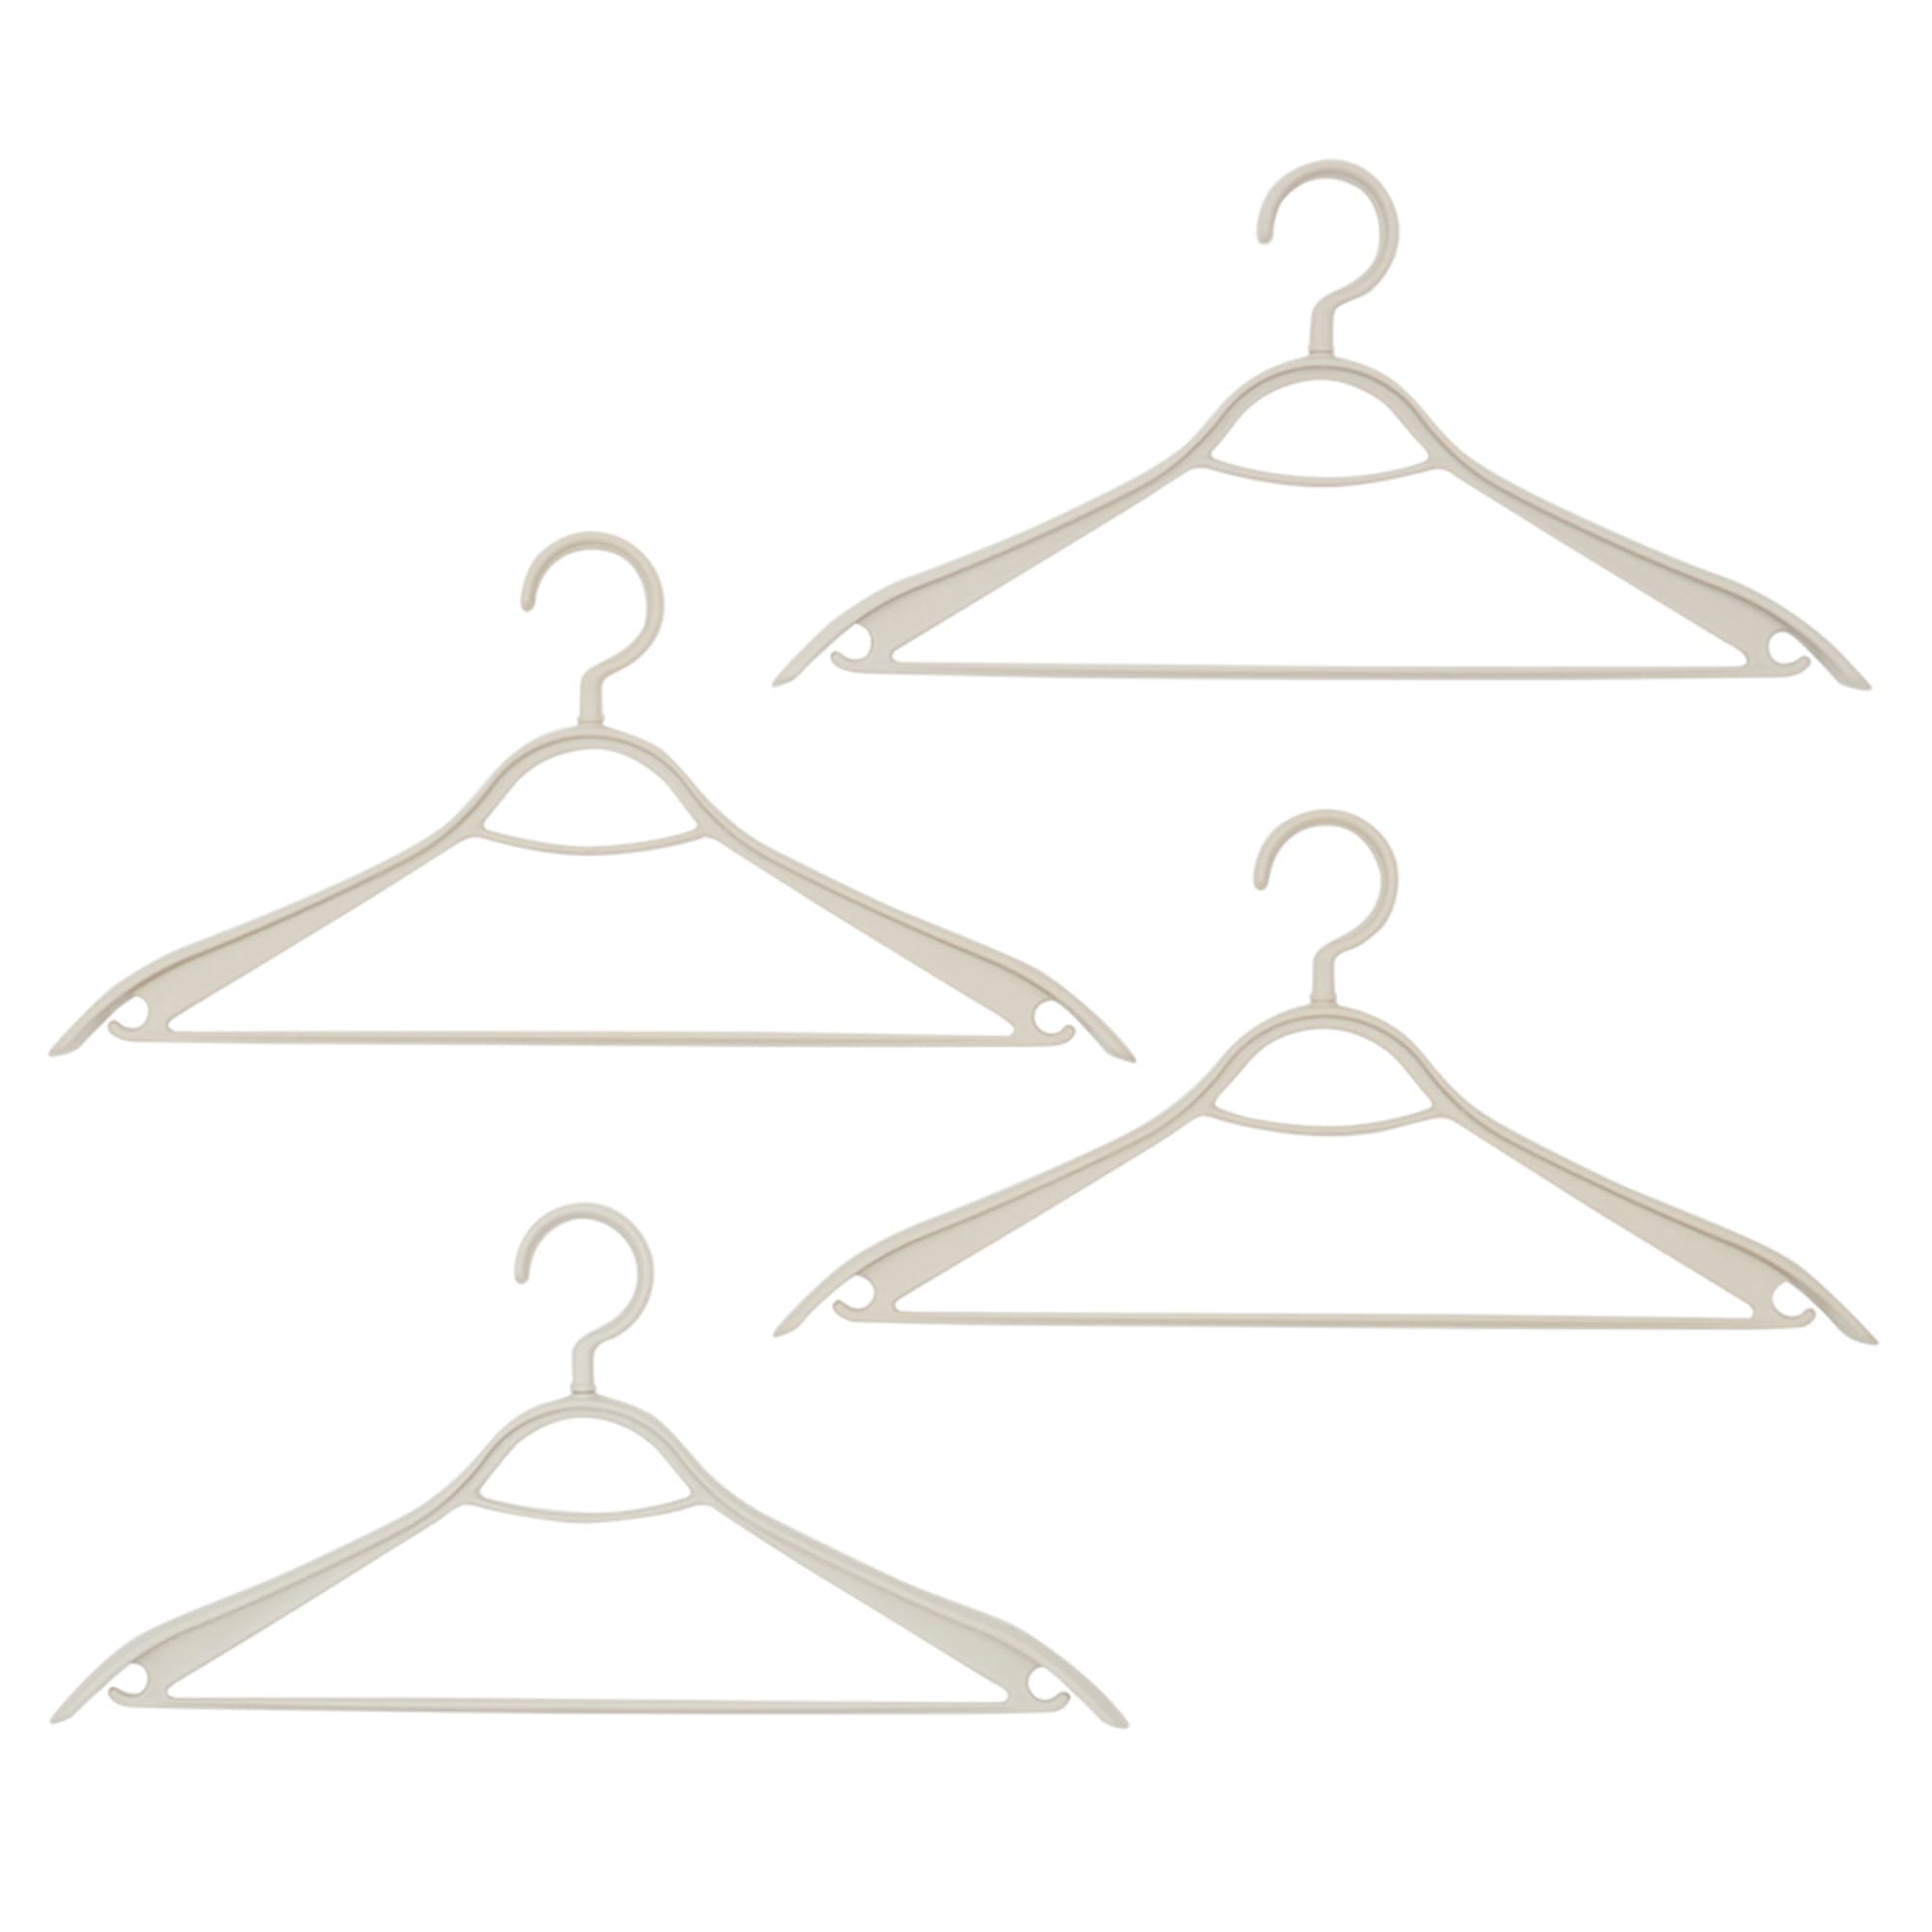 Home Basics Plastic Hangers, (Pack of 4), Timber Beige $5 EACH, CASE PACK OF 12